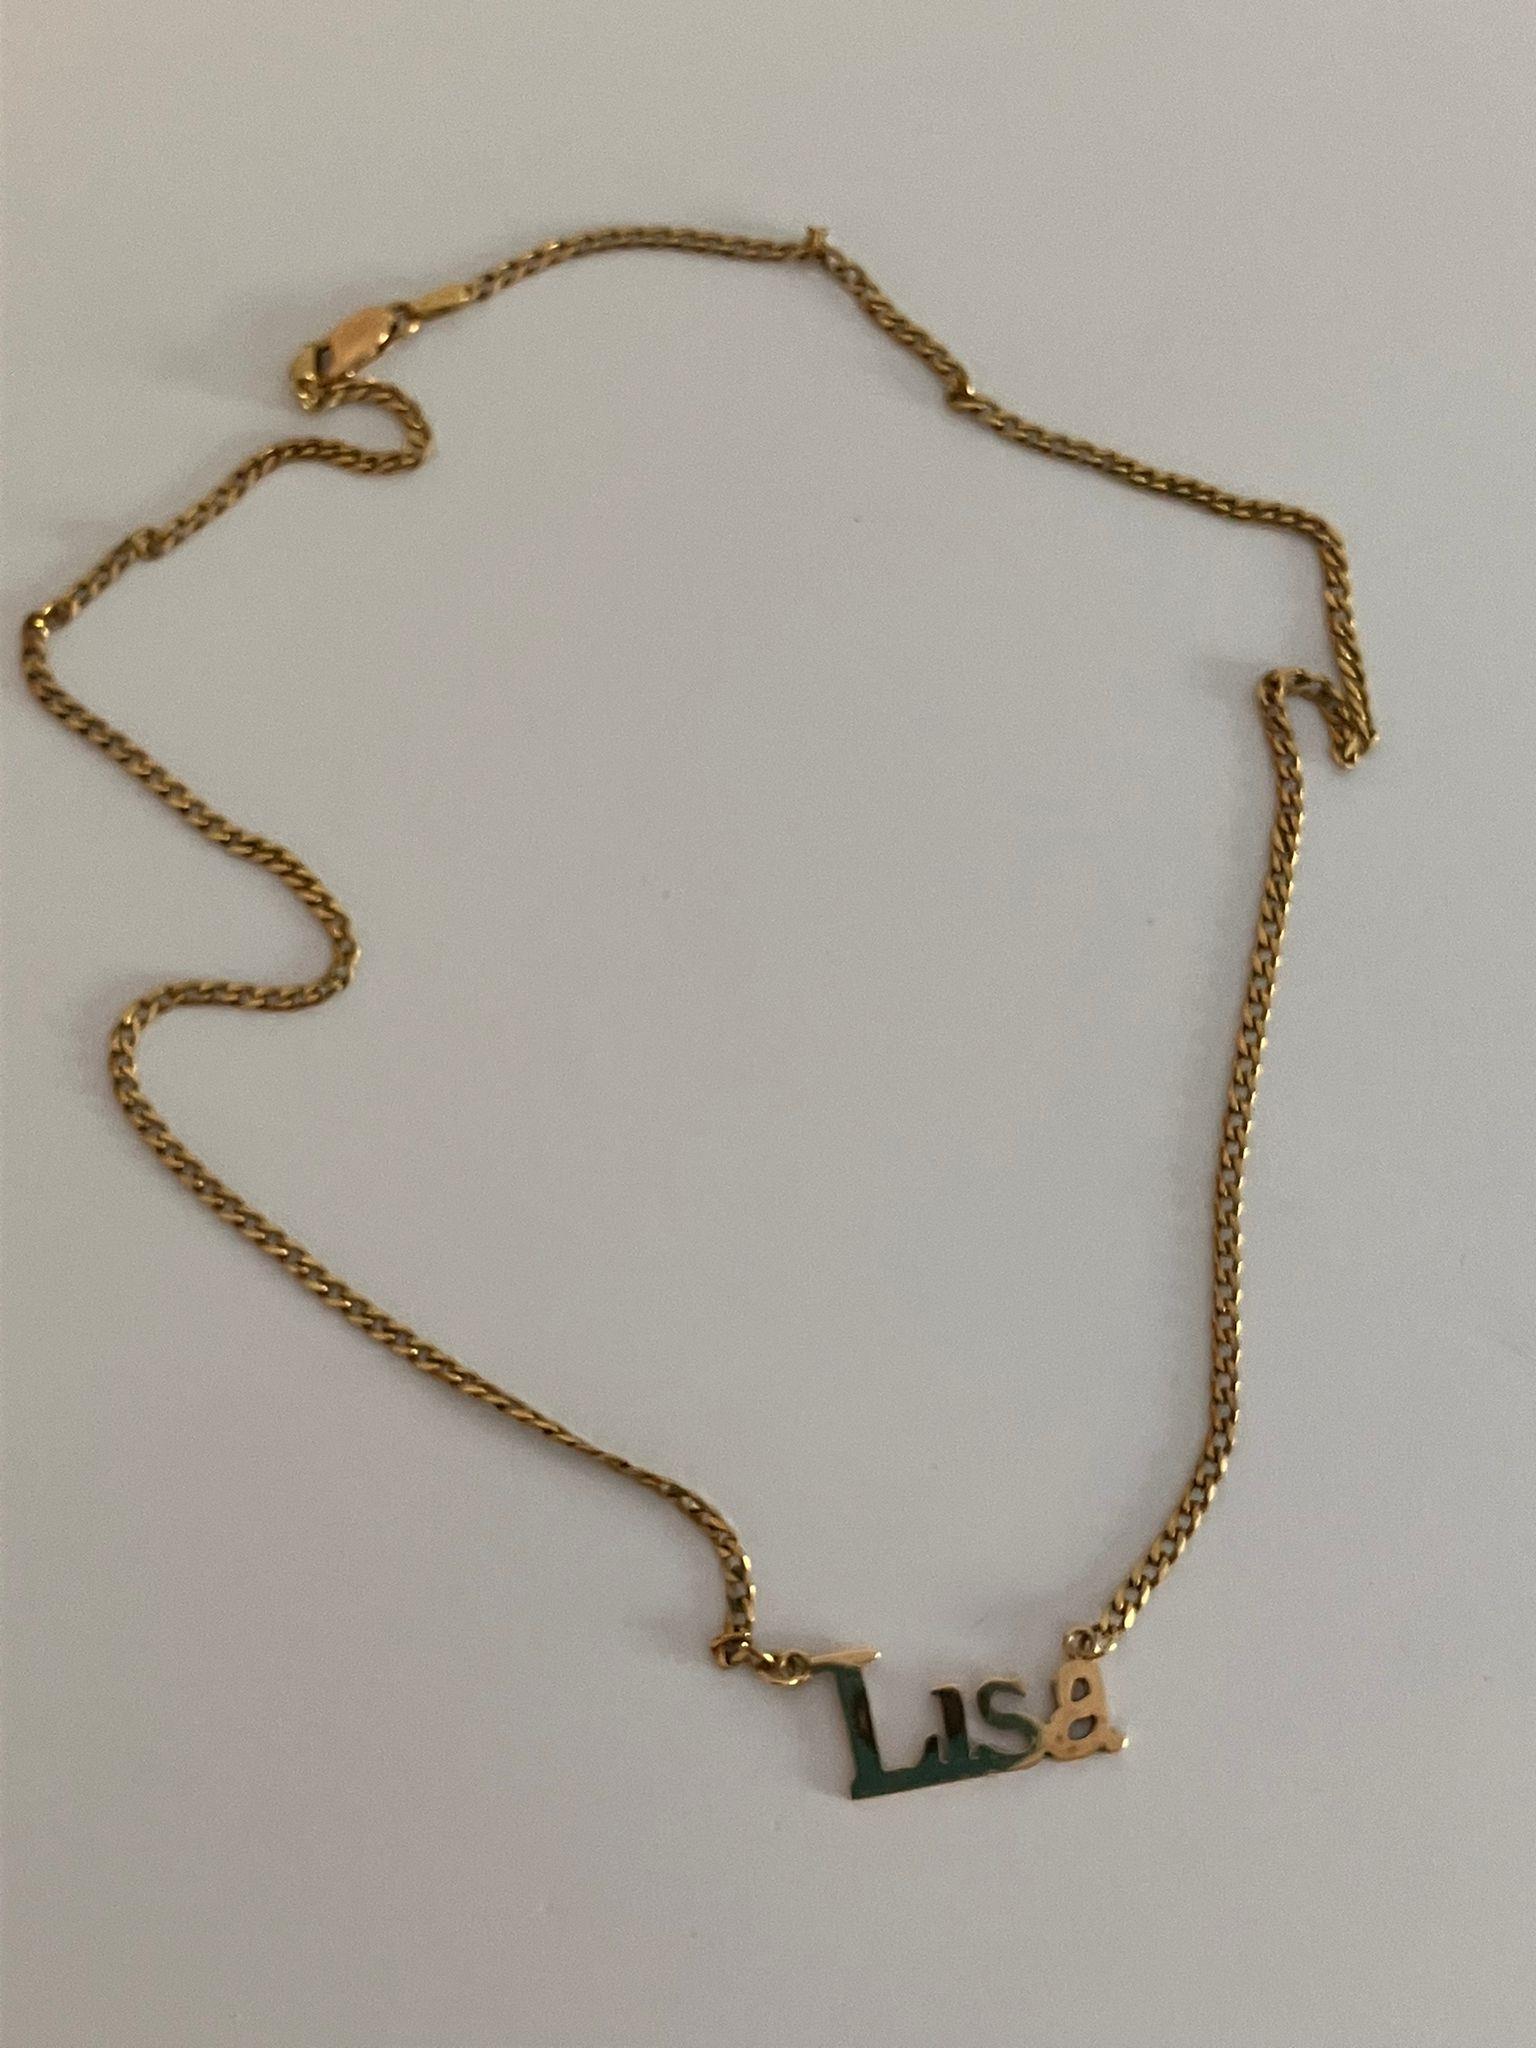 9 carat GOLD, CURB CHAIN NECKLACE with name of LISA. Full UK hallmark. 5.7 grams. 46 cm. - Image 5 of 11